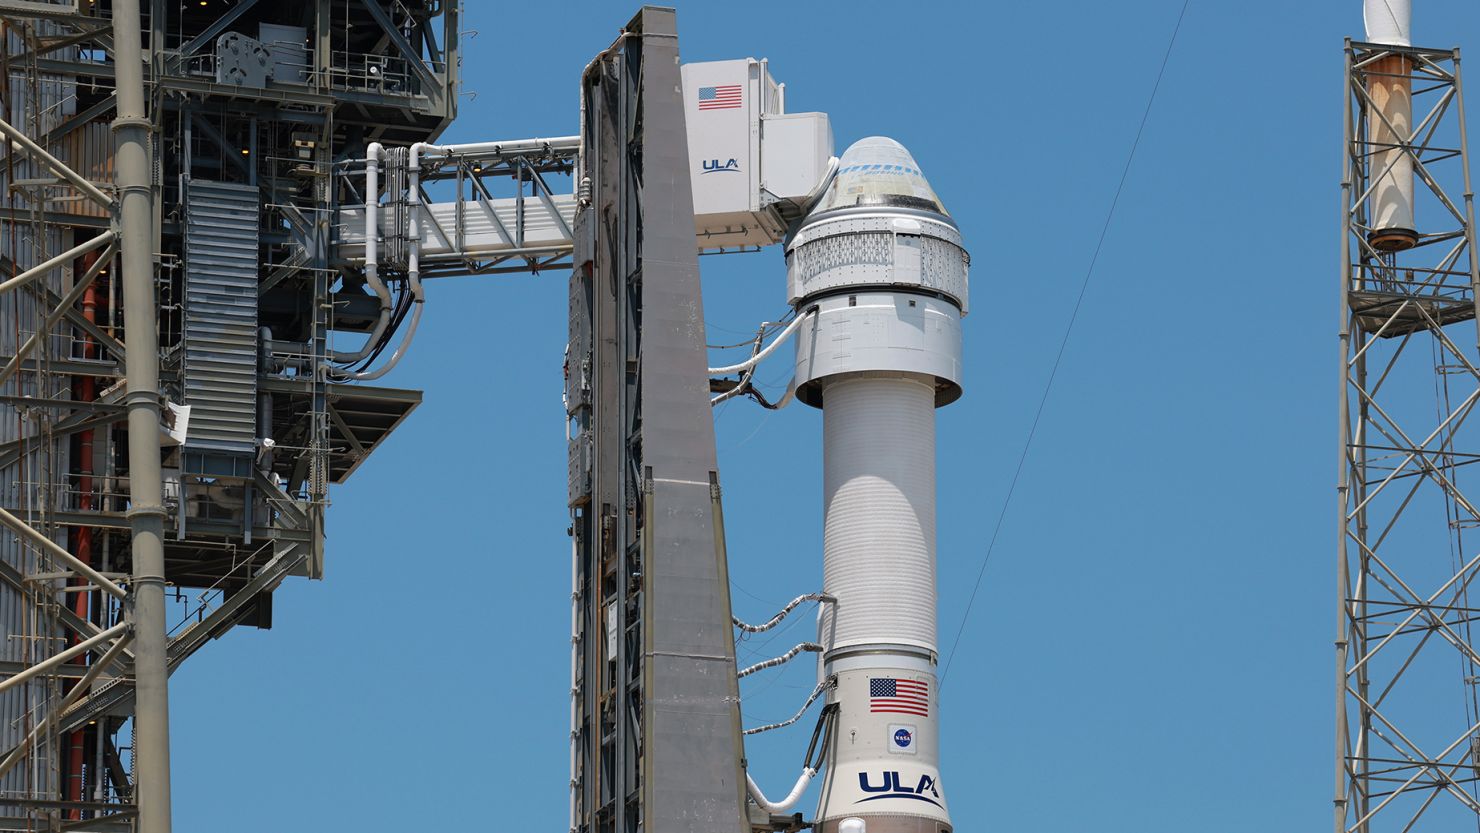 Starliner spacecraft sits atop a United Launch Alliance Atlas V rocket on May 7, after the planned launch of the Boeing Crew Flight Test was scrubbed.